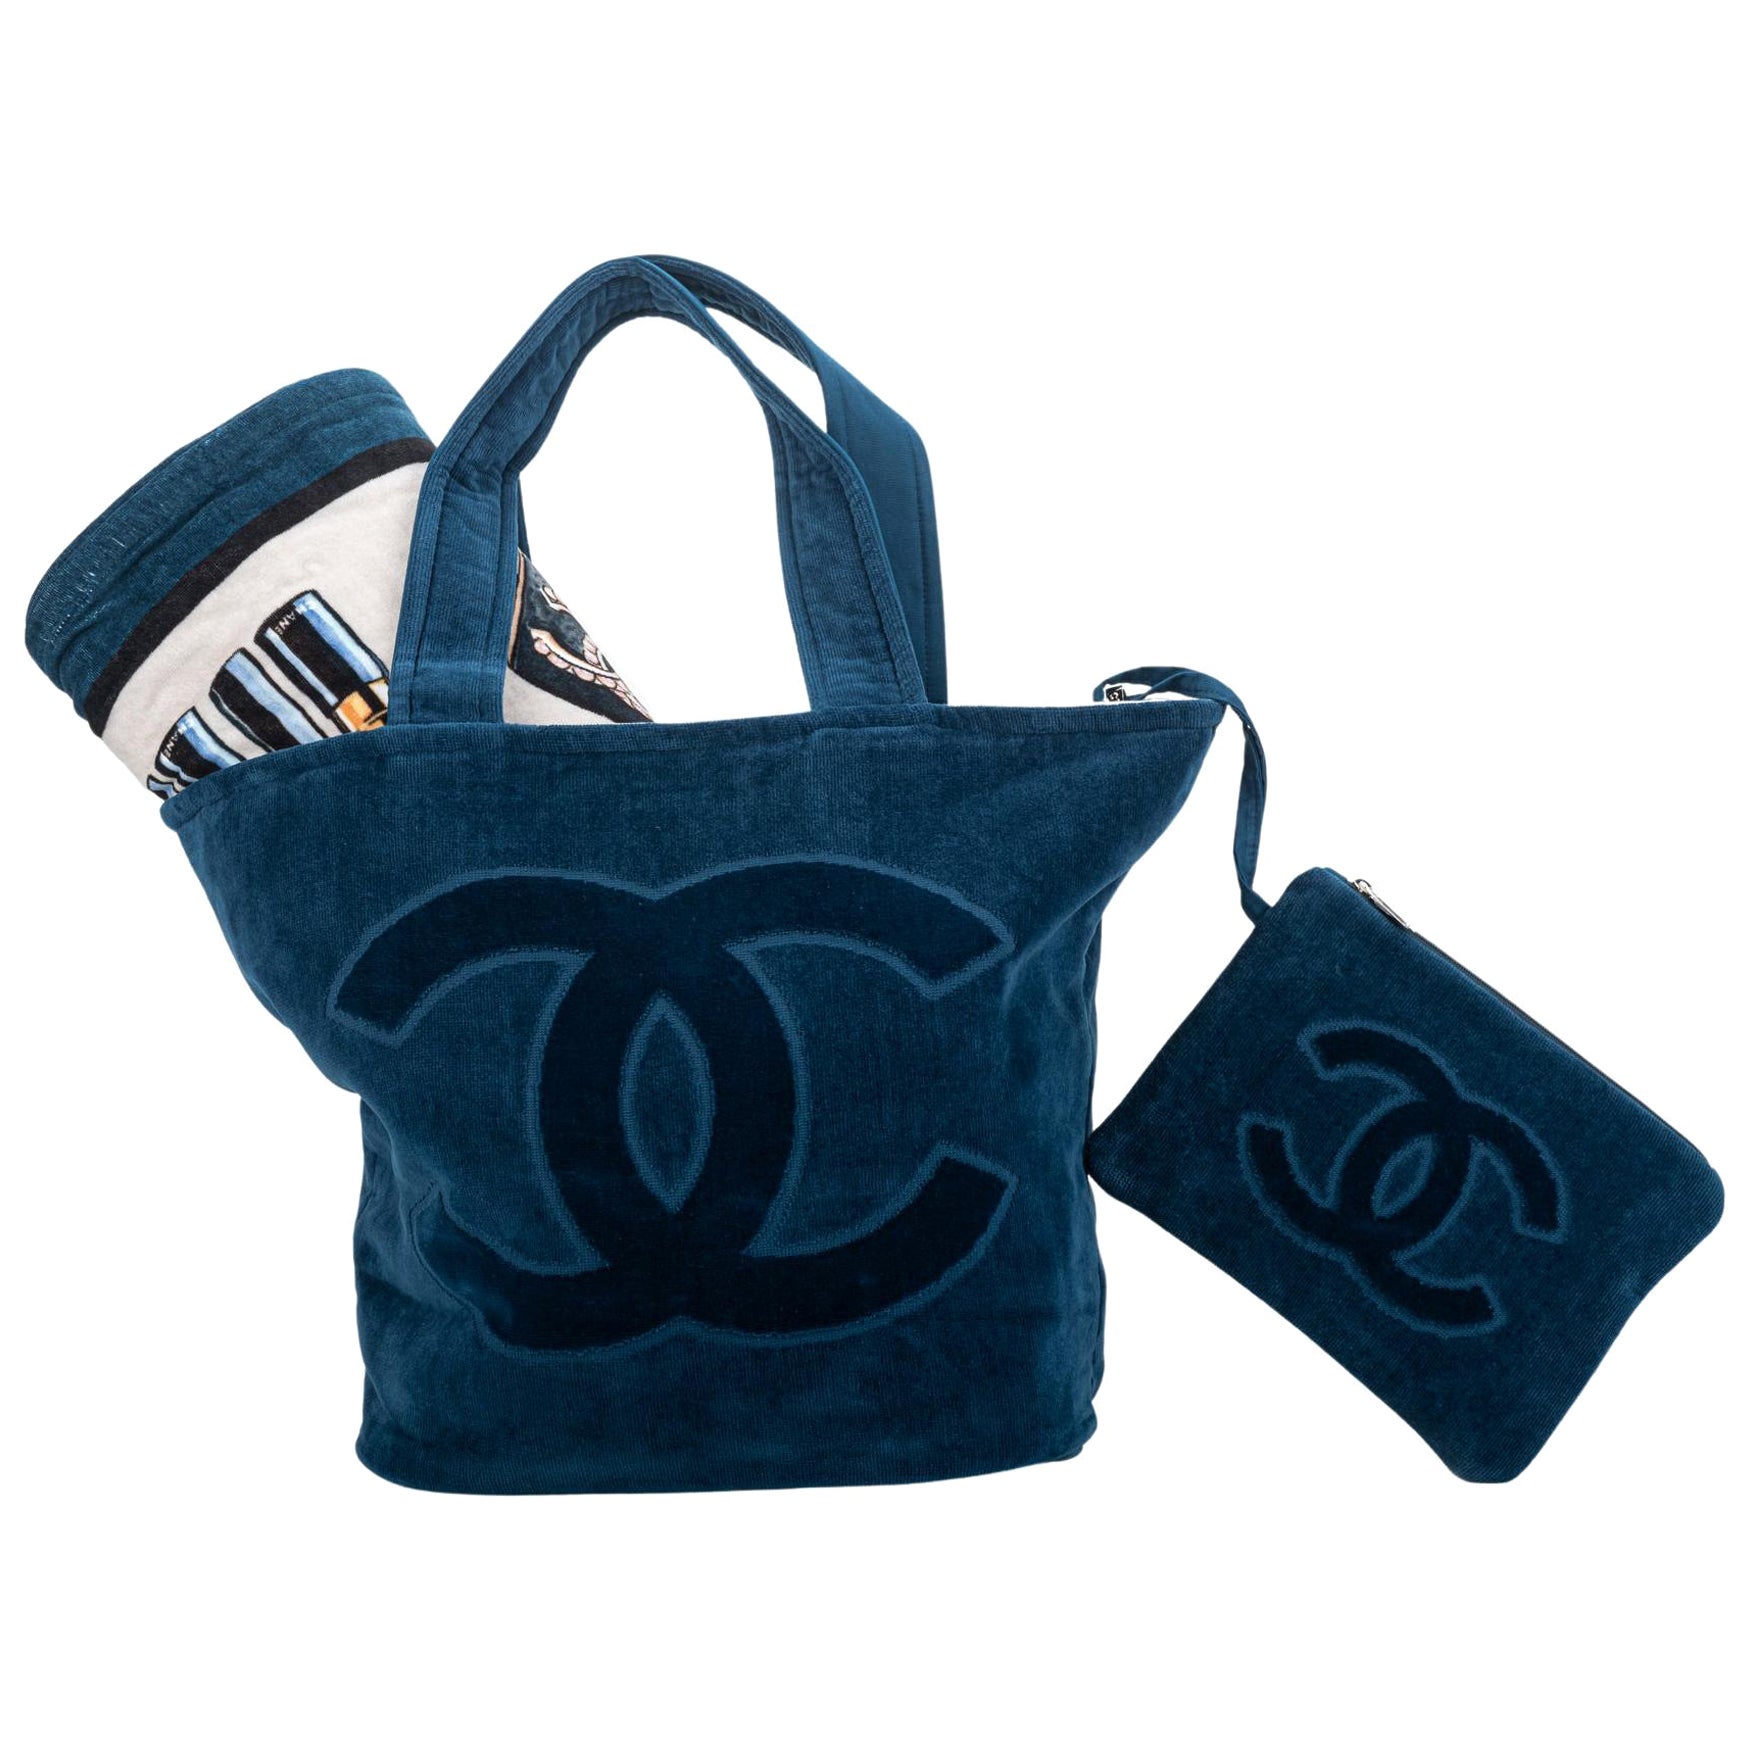 Chanel Makes the Most Luxurious Beach Bag and Towel Set Ever - PurseBlog